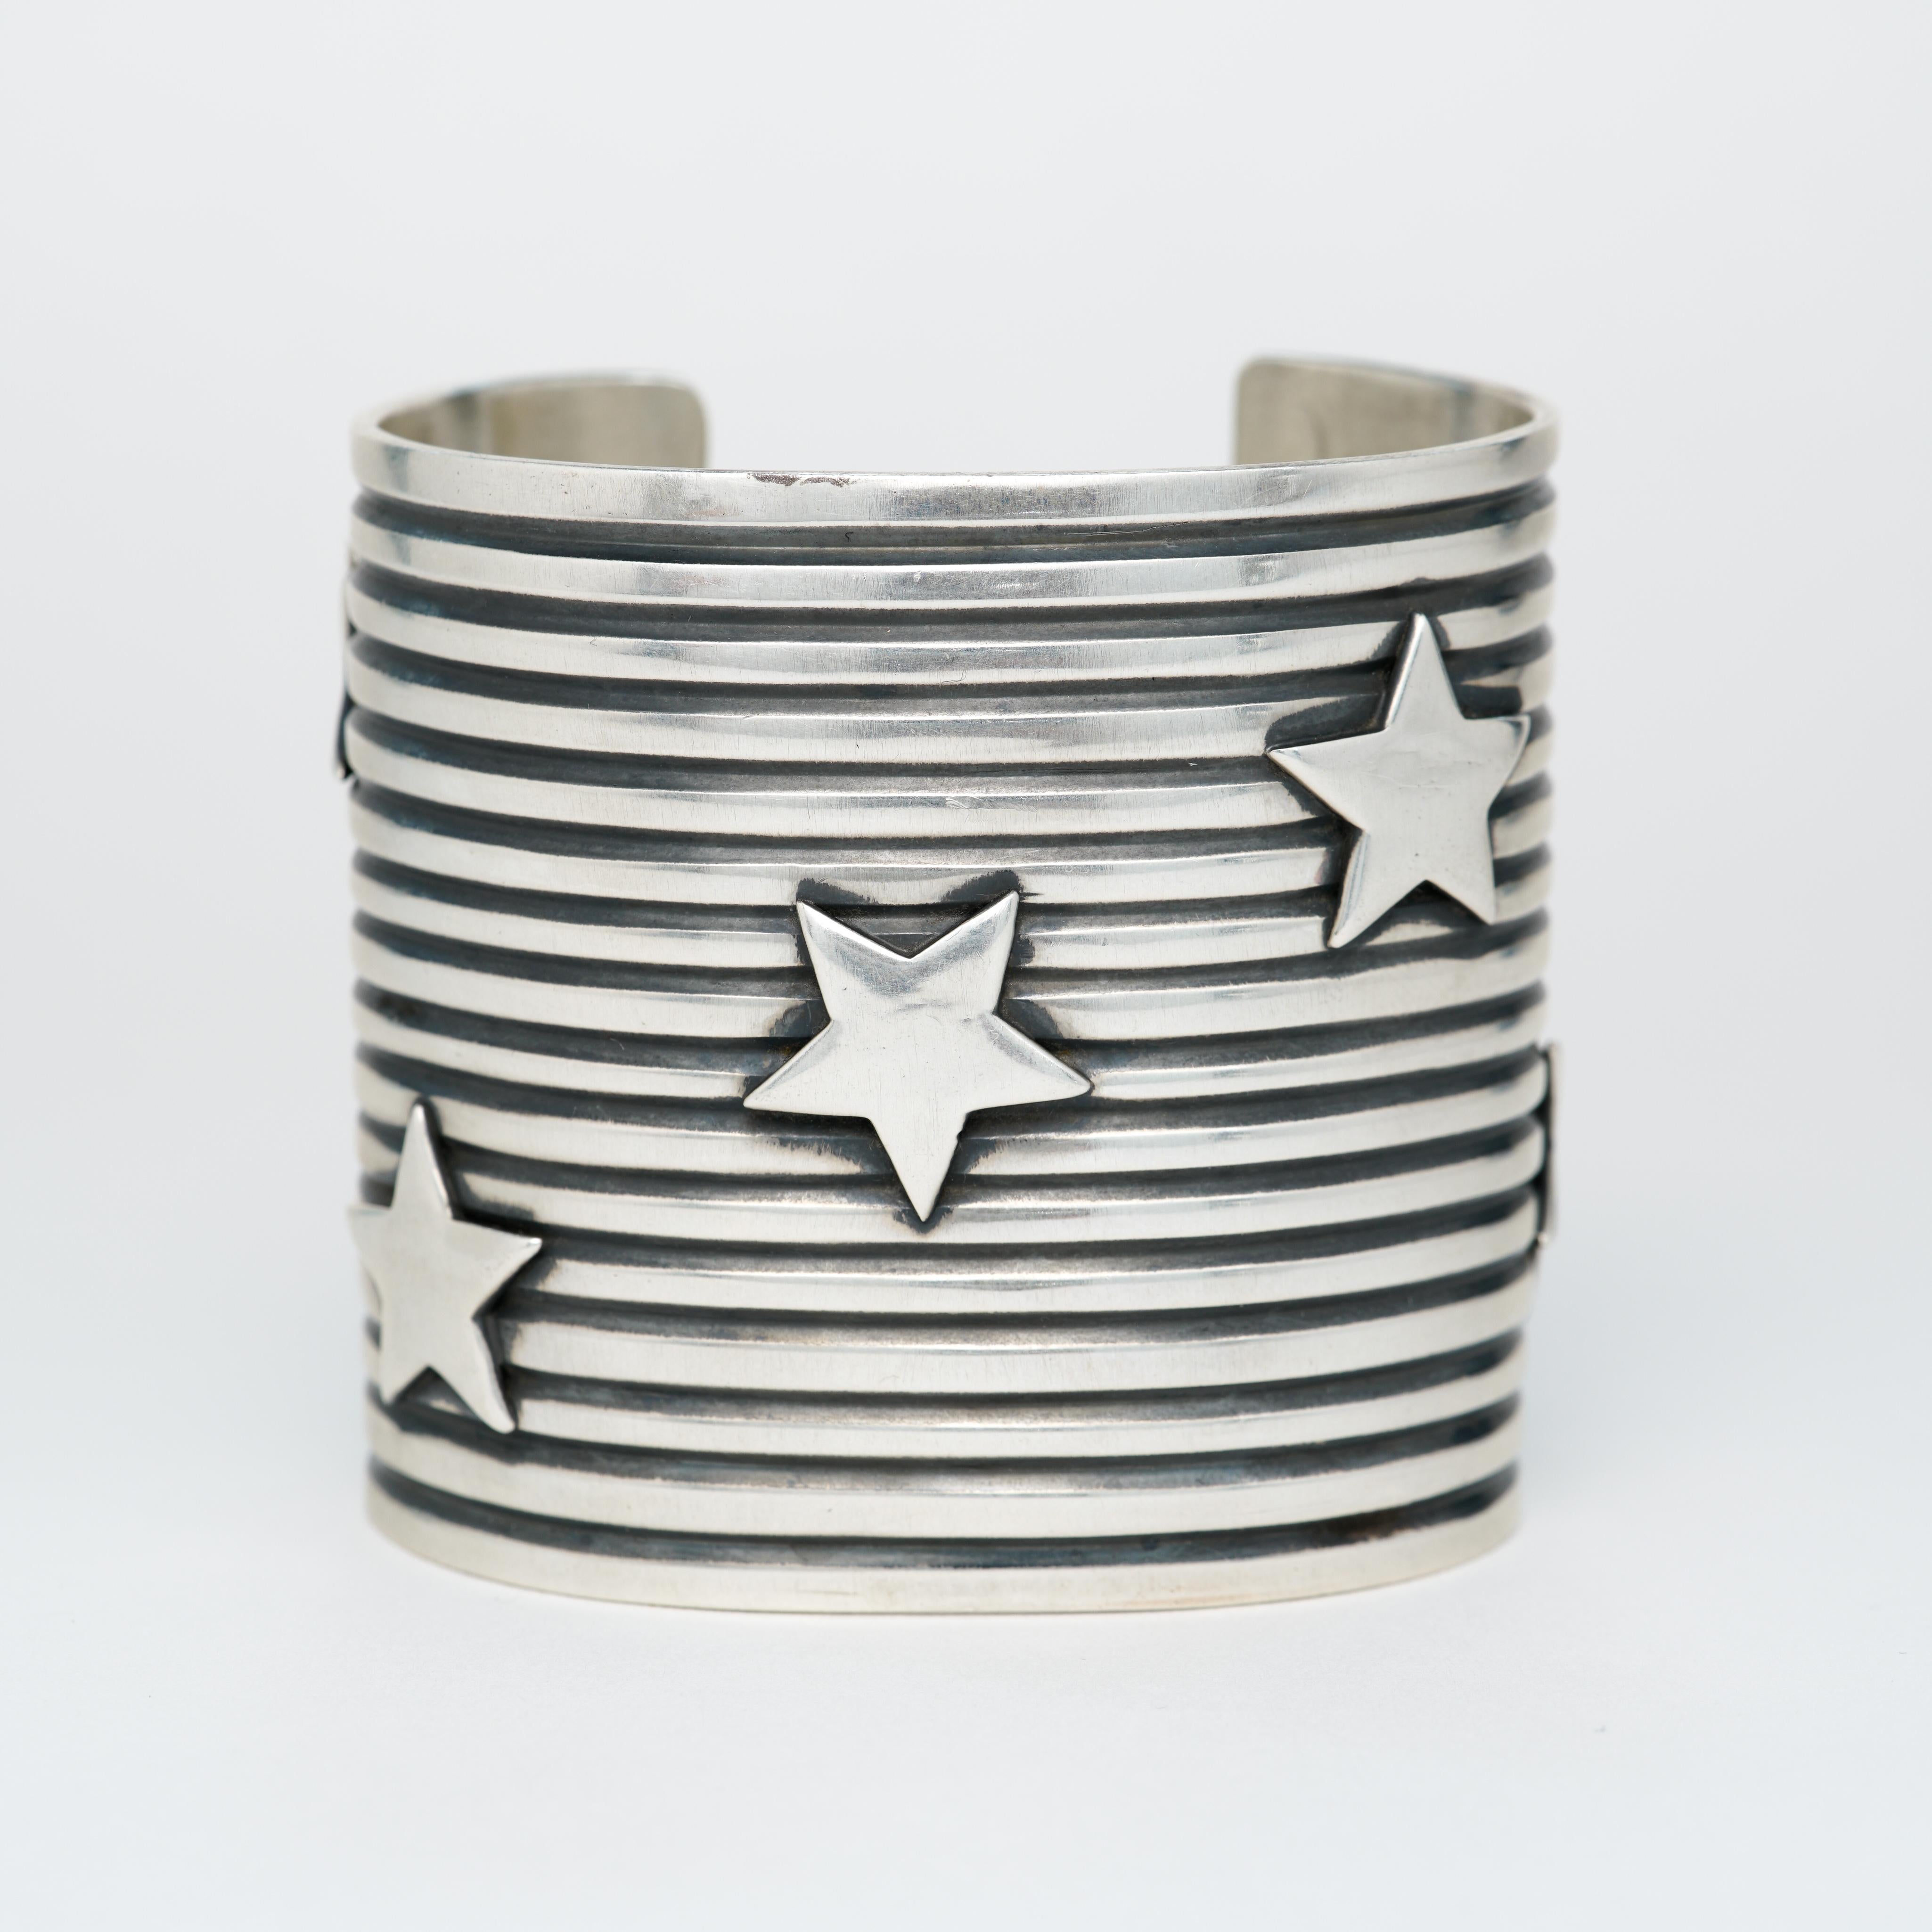 Native American Signed A. Cadman Wide Silver Cuff
Andy Cadman

Heavy Substantial and wide. Amazing statement cuff.

H 57.63mm x W 62.84
123 grams